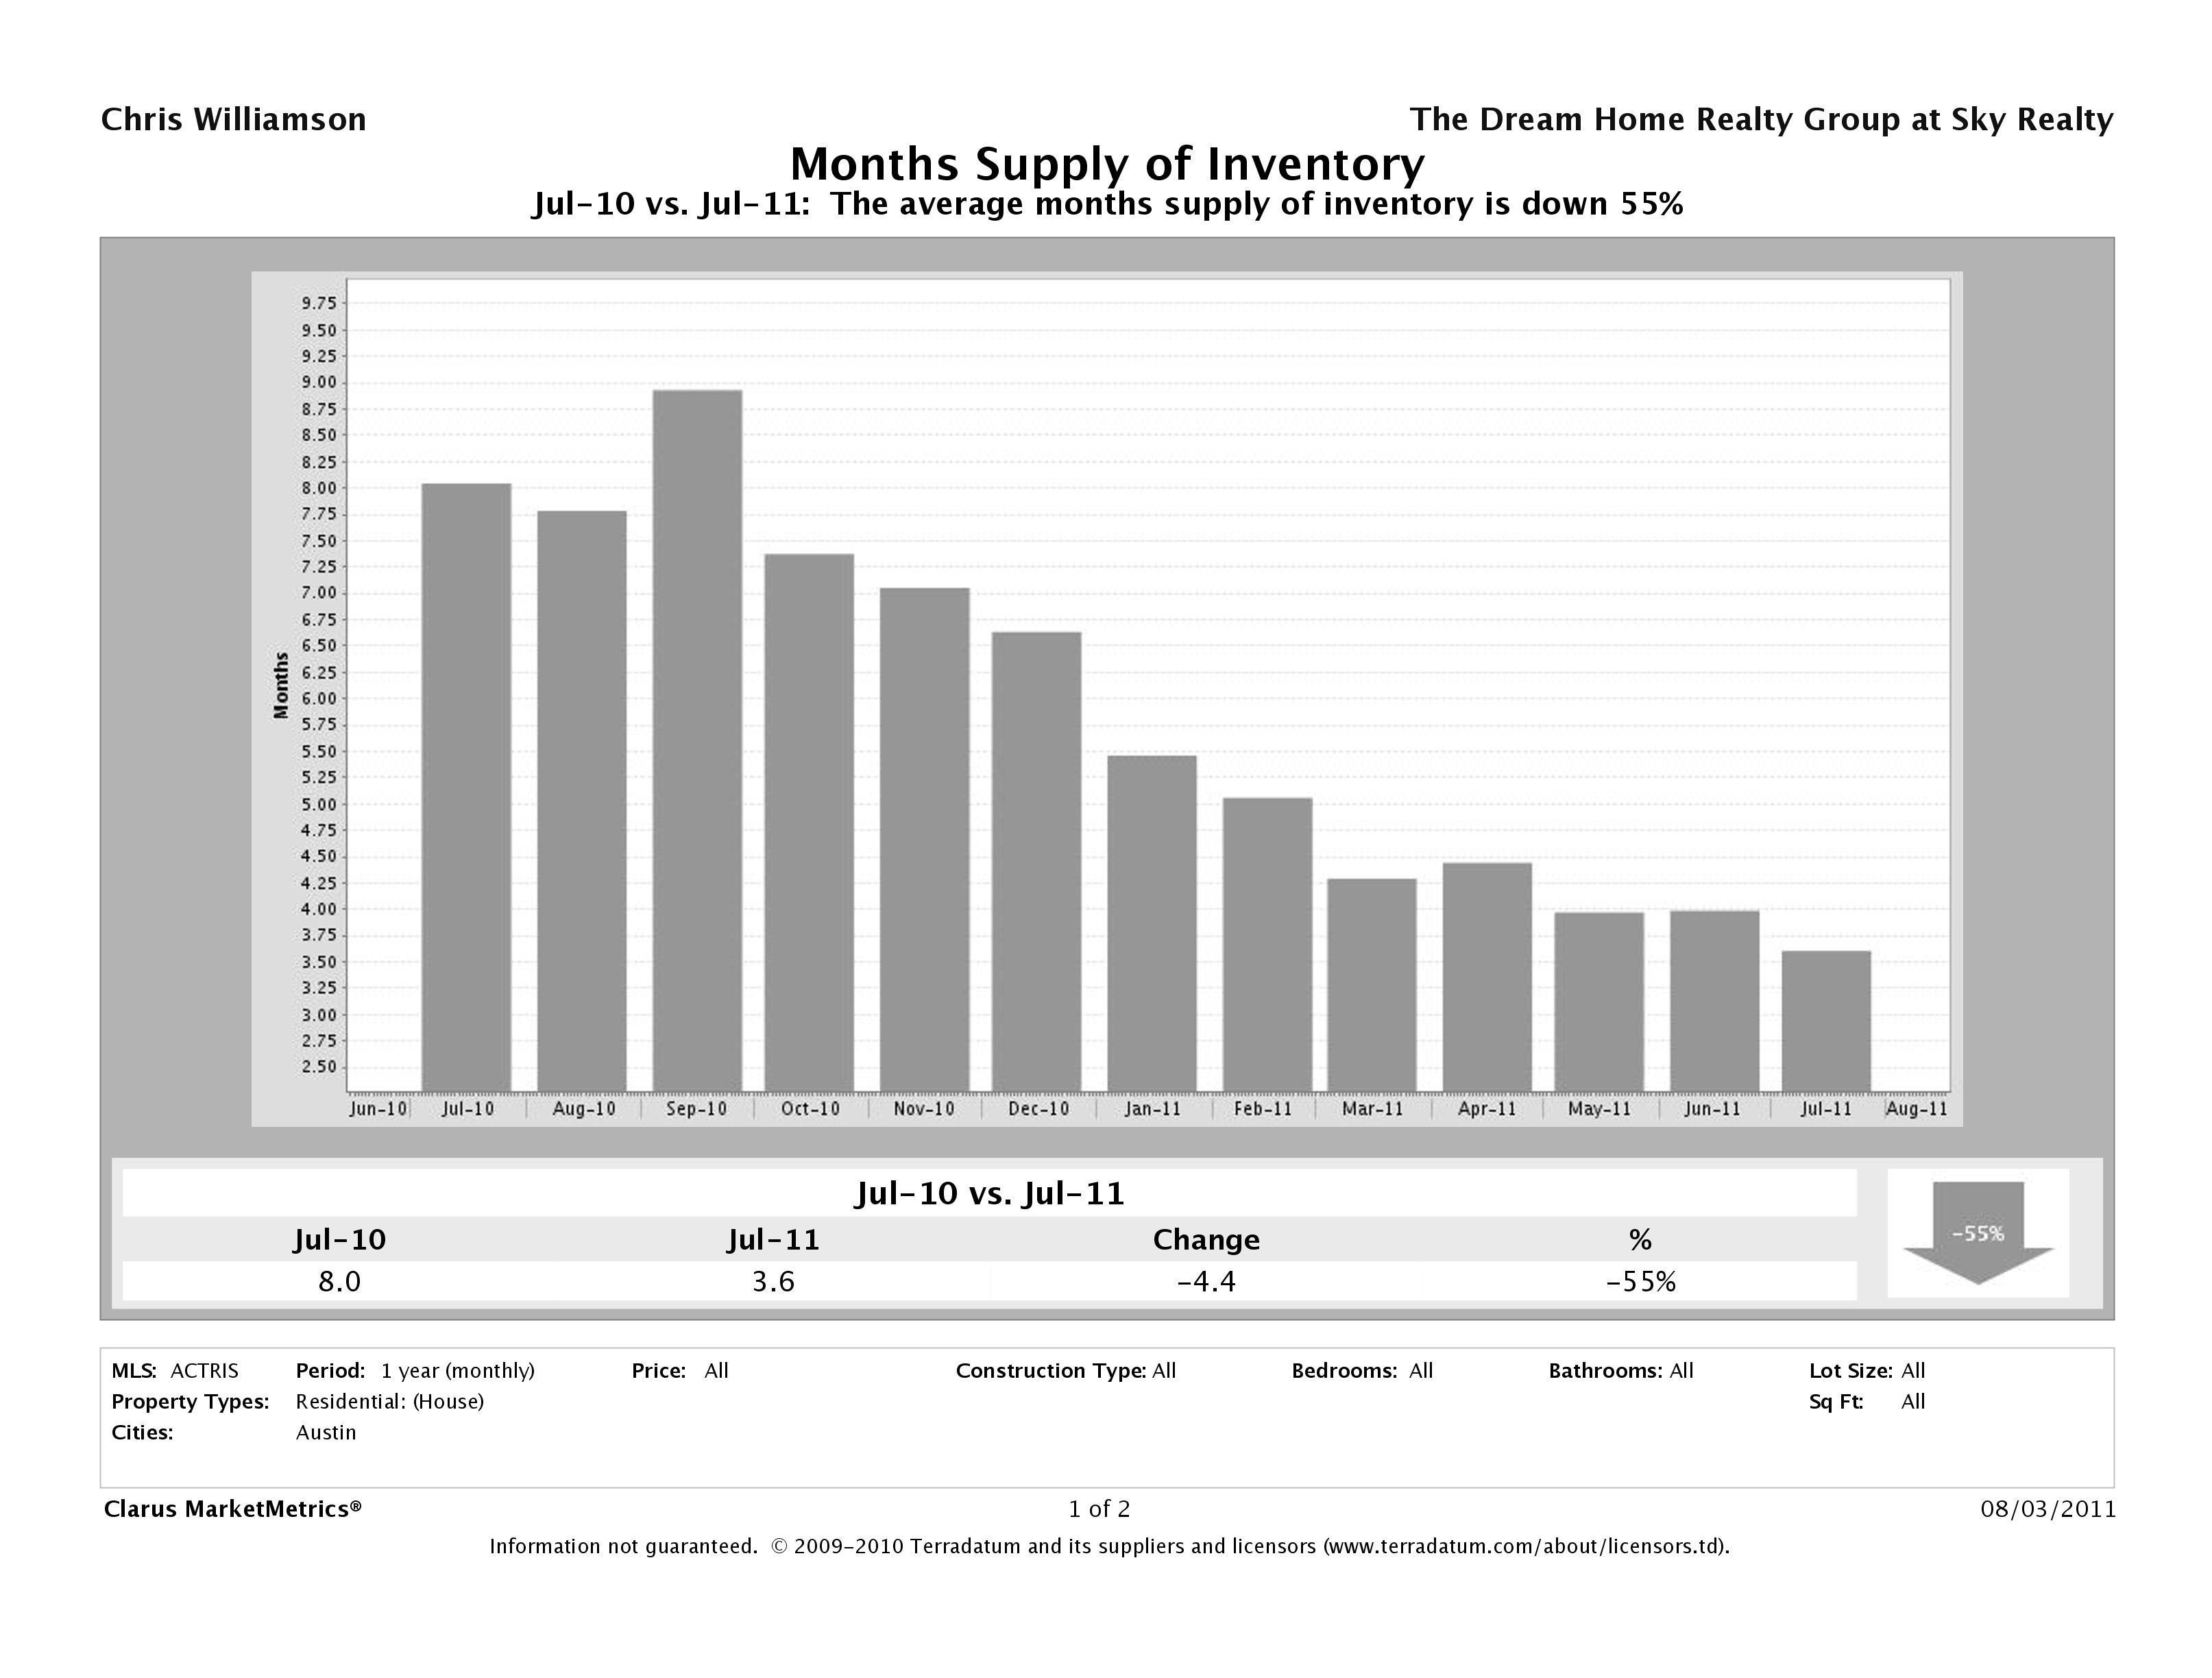 Austin single family home months inventory July 2011